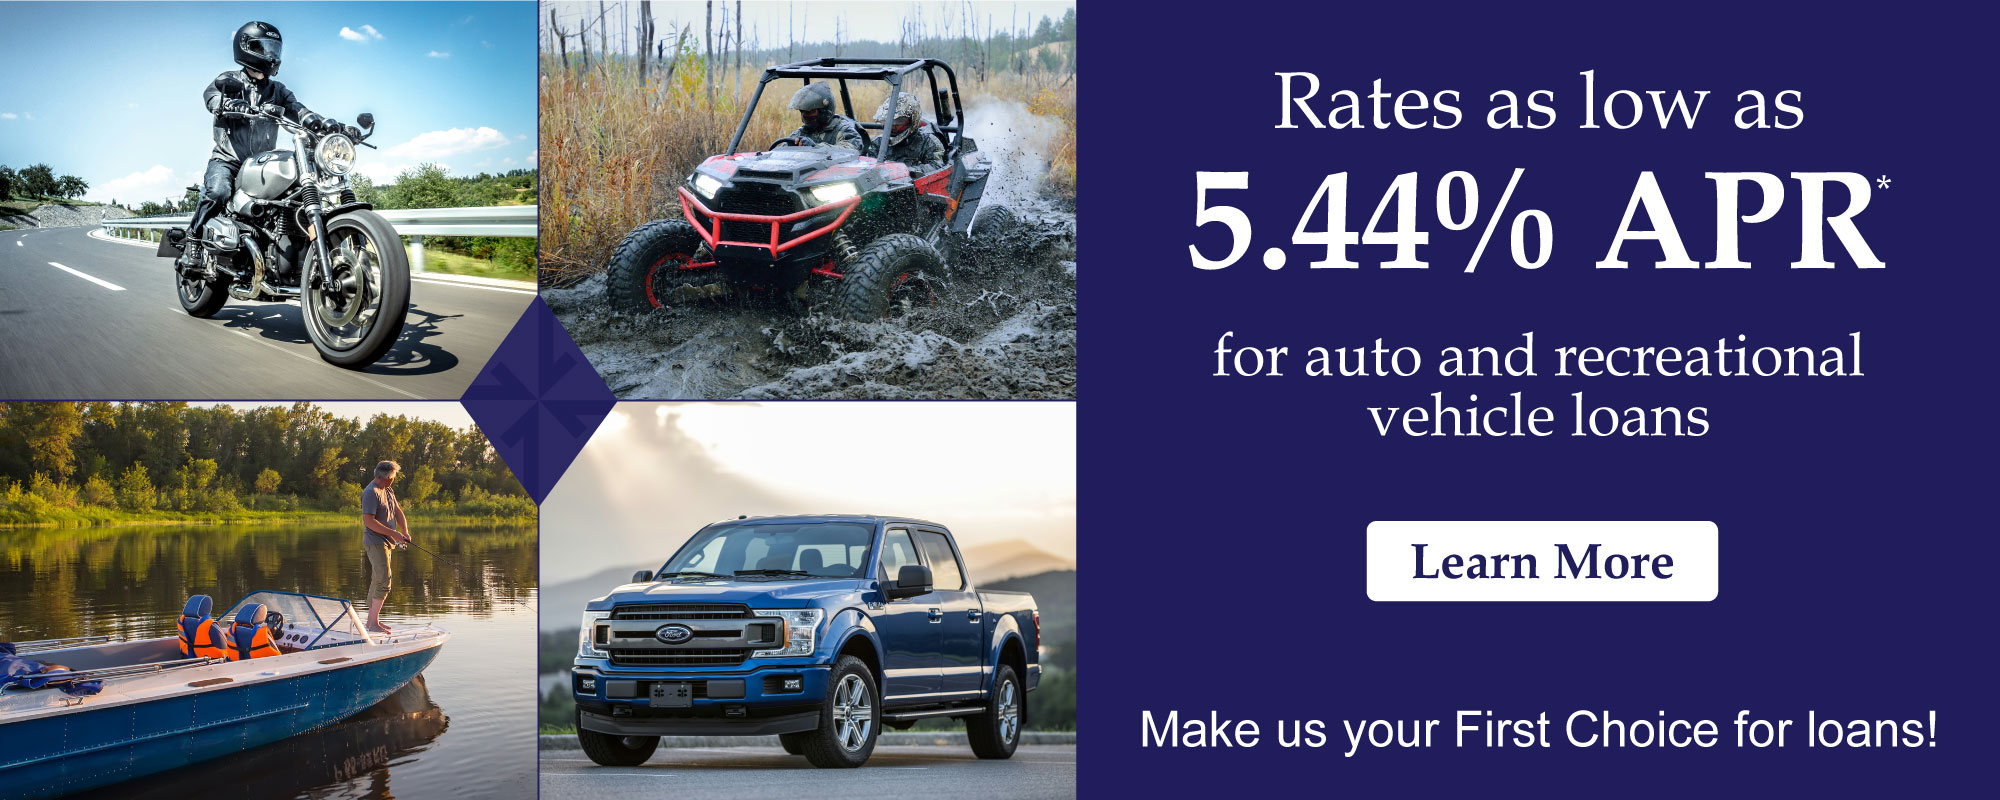 Rates as low as 5.44% APR on auto and recreational vehicle loans